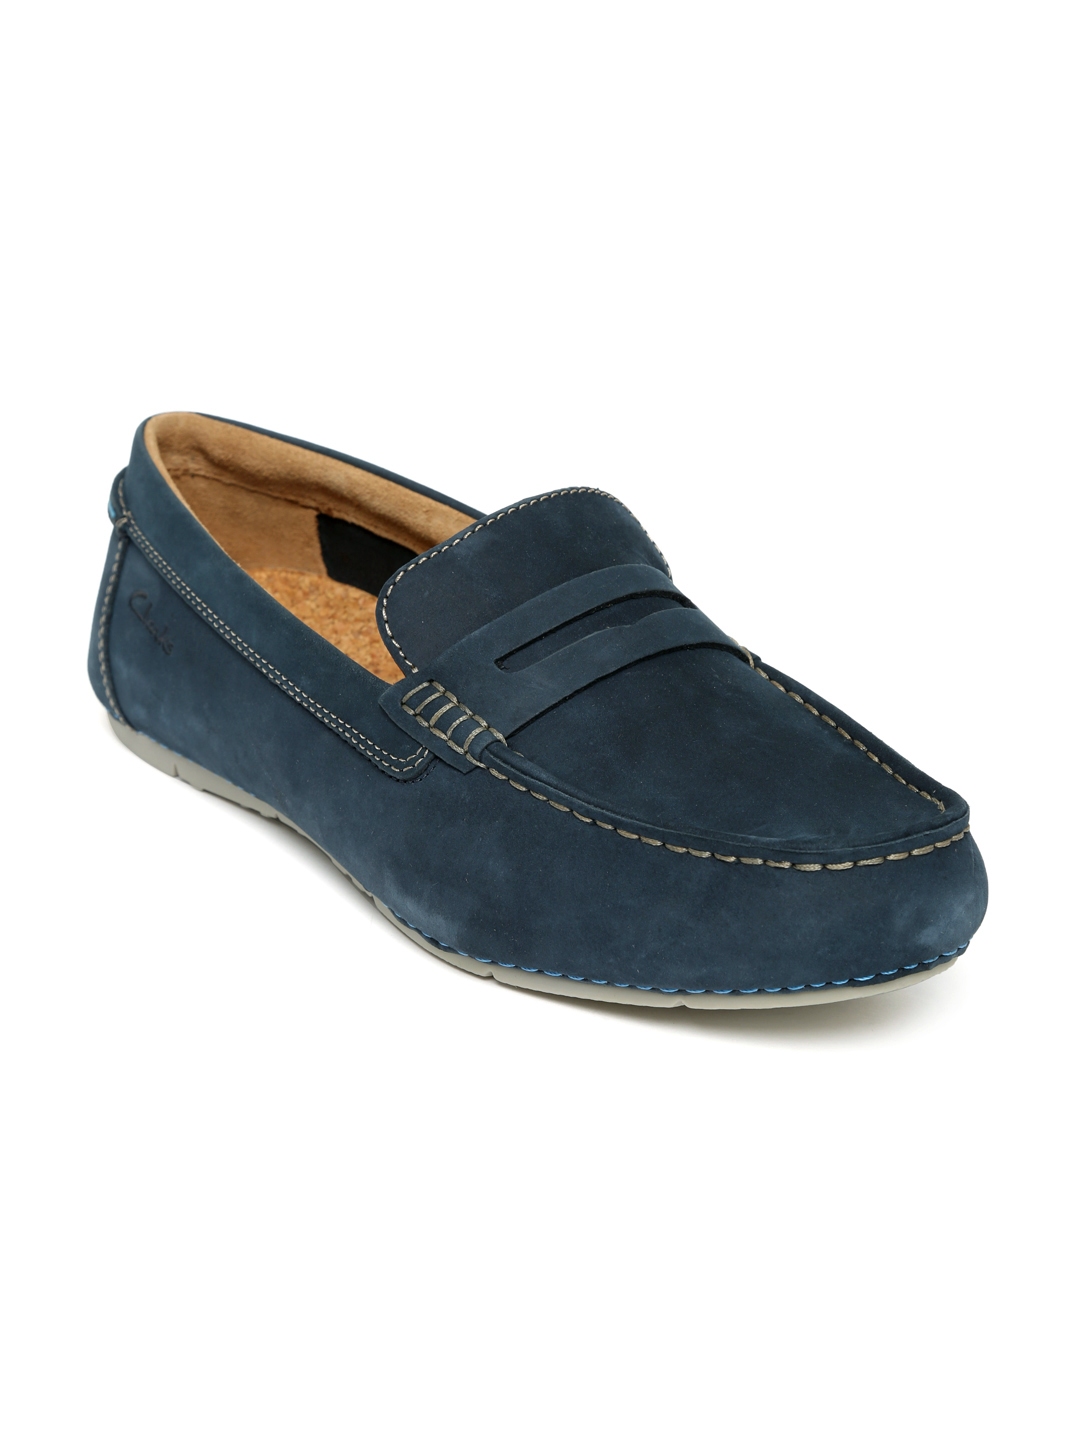 Buy Clarks Men Navy Suede Leather Driving Shoes - Casual Shoes for Men ...